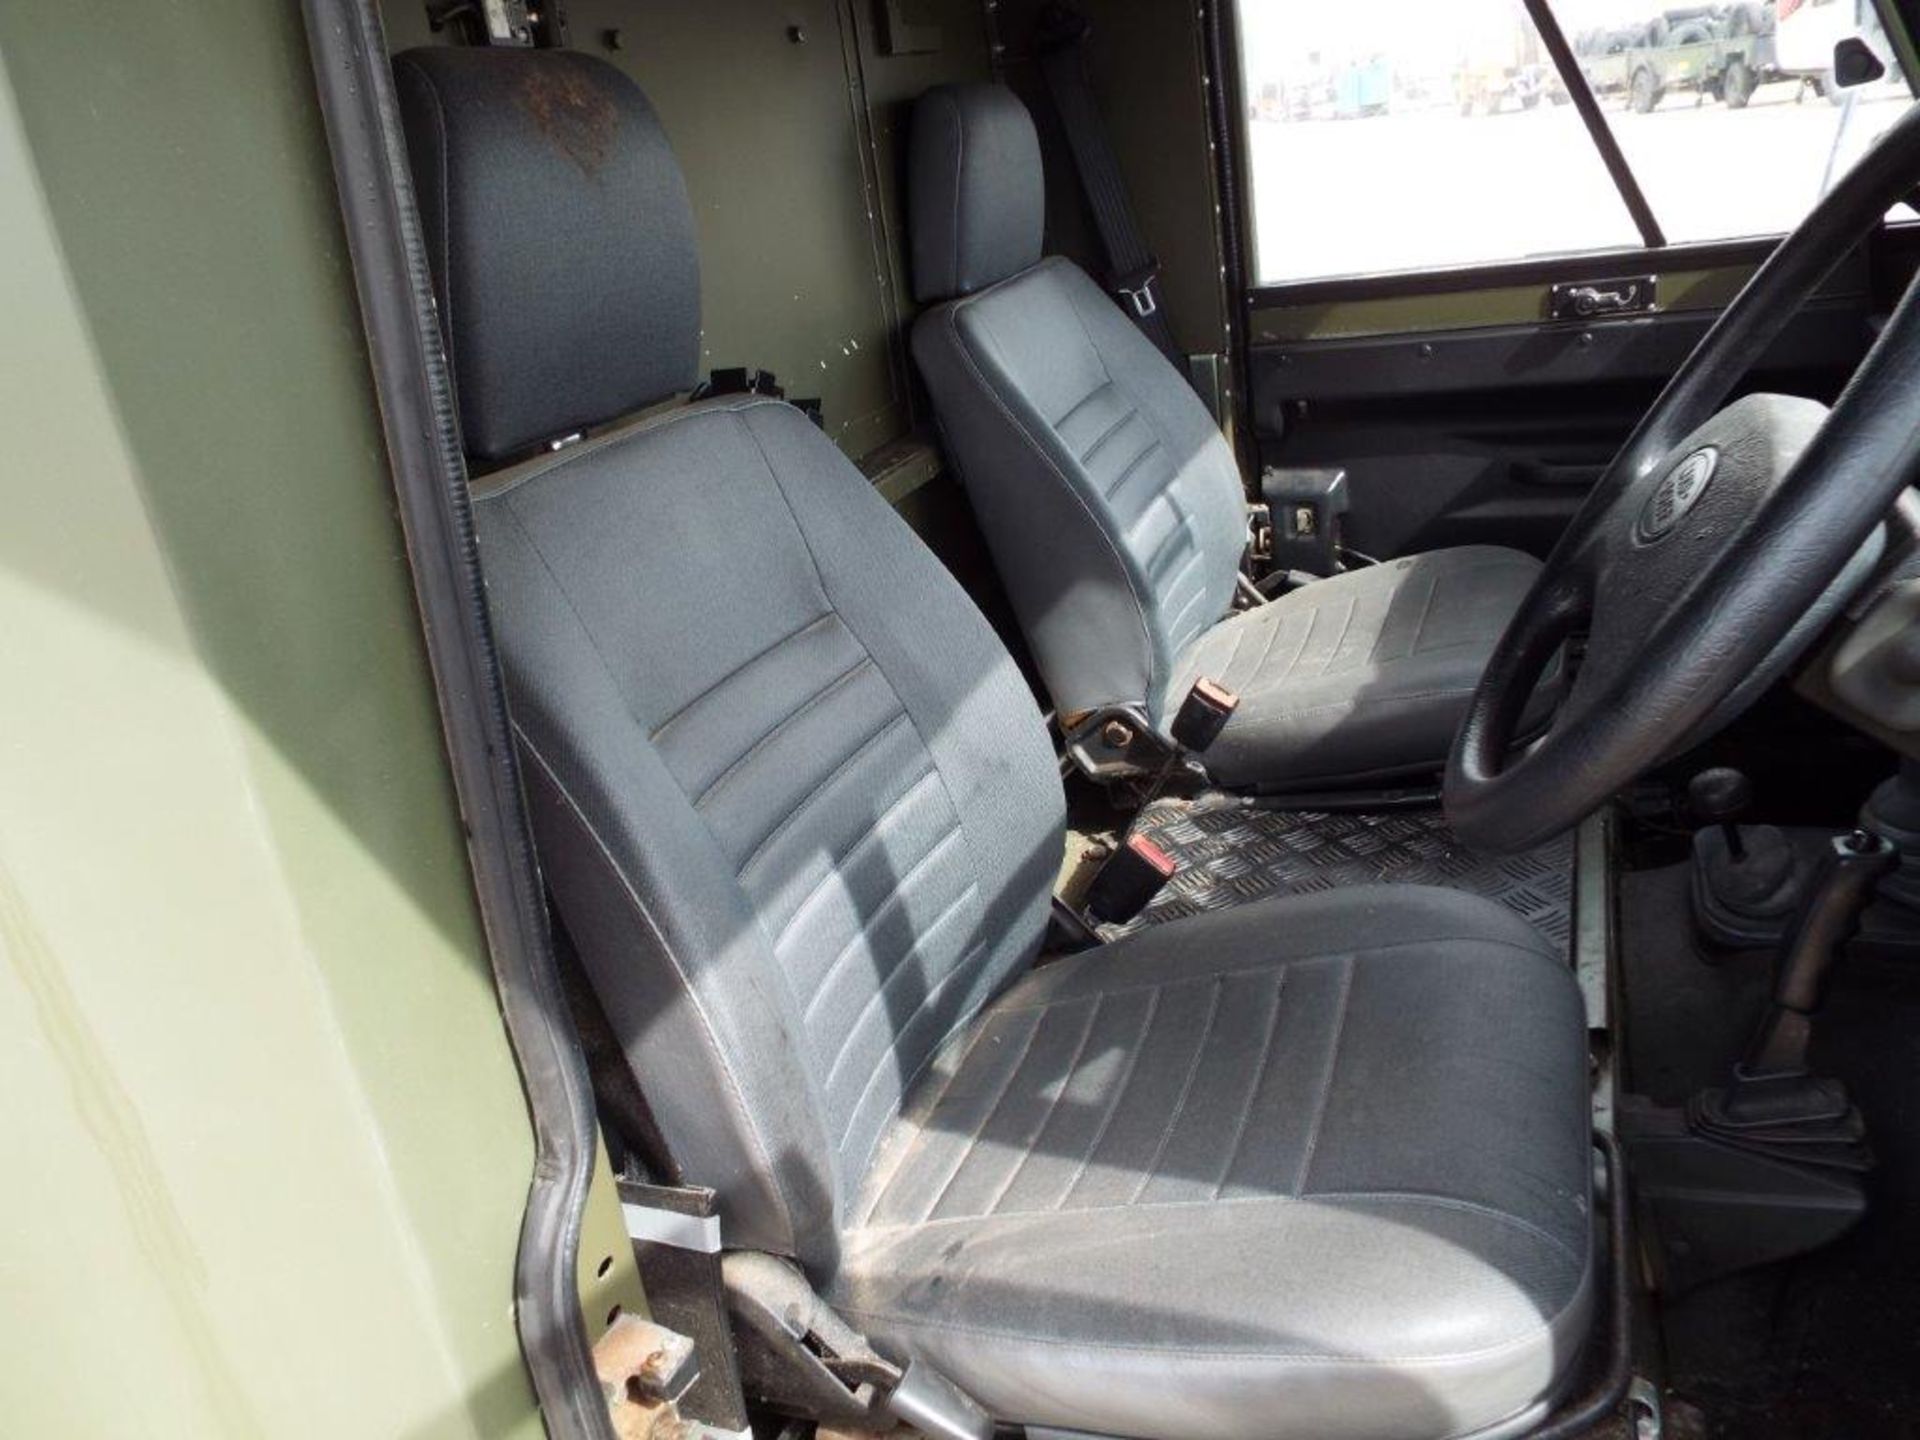 Military Specification Land Rover Wolf 130 Ambulance - Image 11 of 24